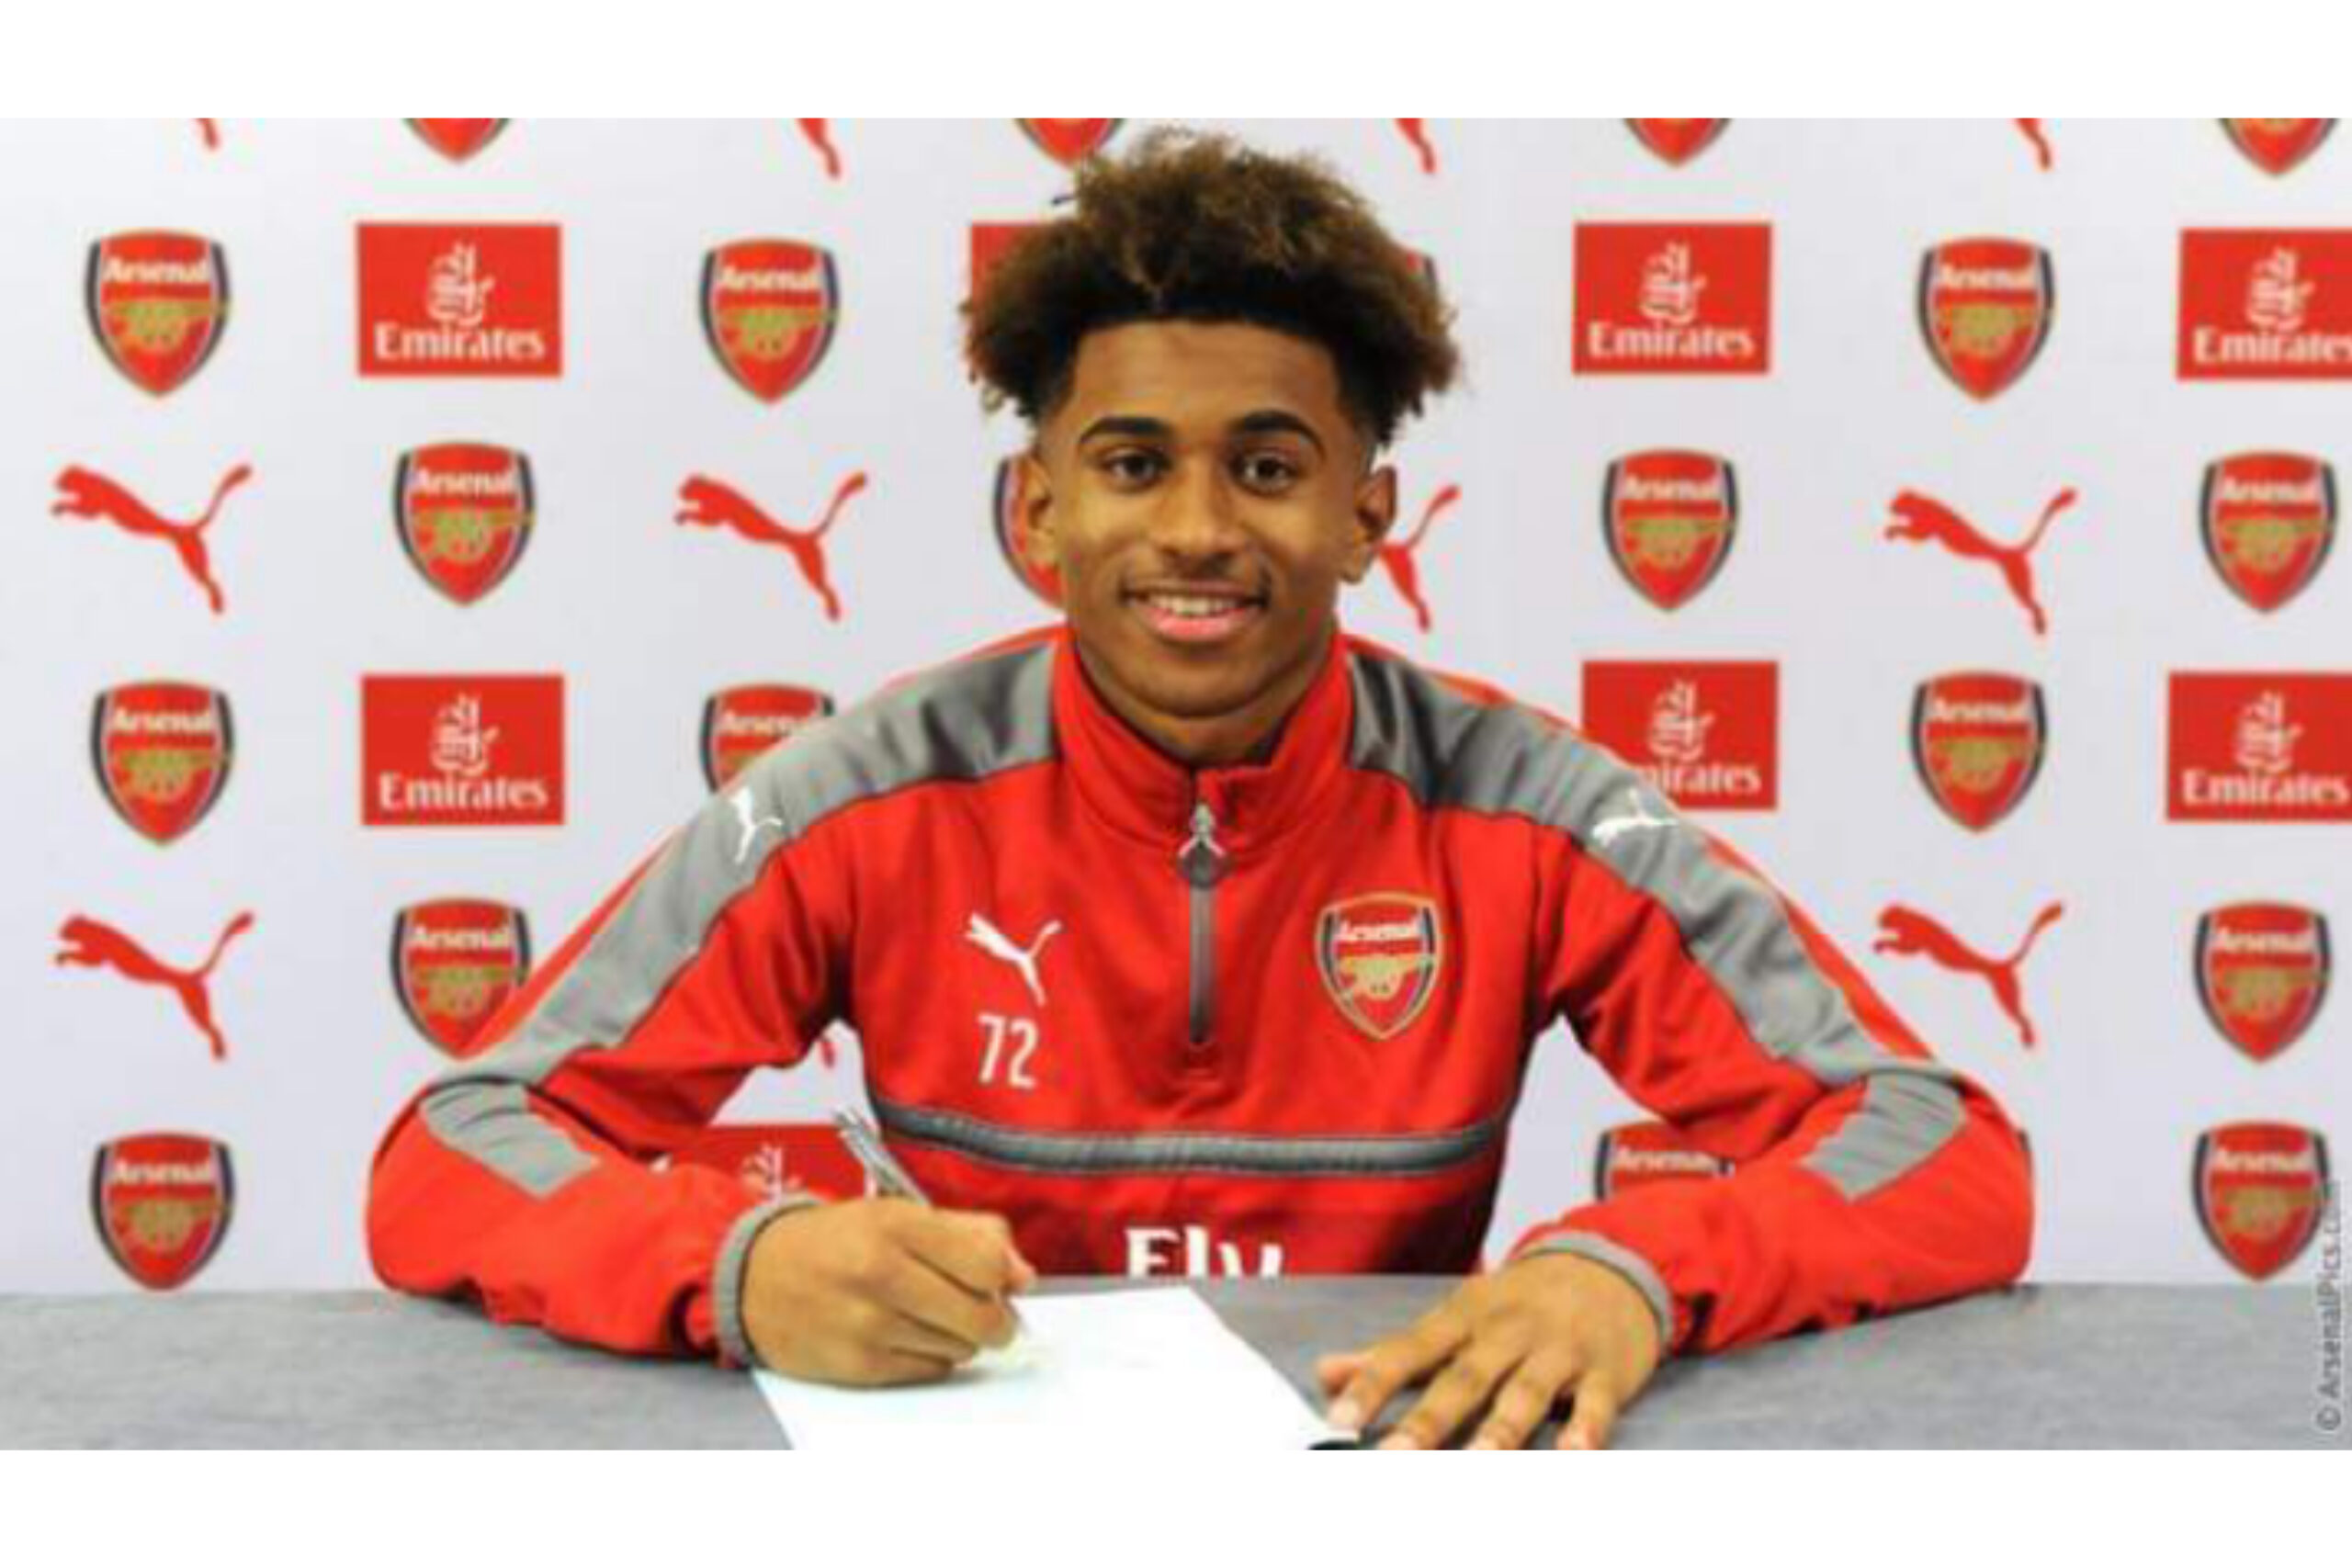 Reiss Nelson Biography: Religion, Age, Parents, Family, Net Worth and Girlfriend